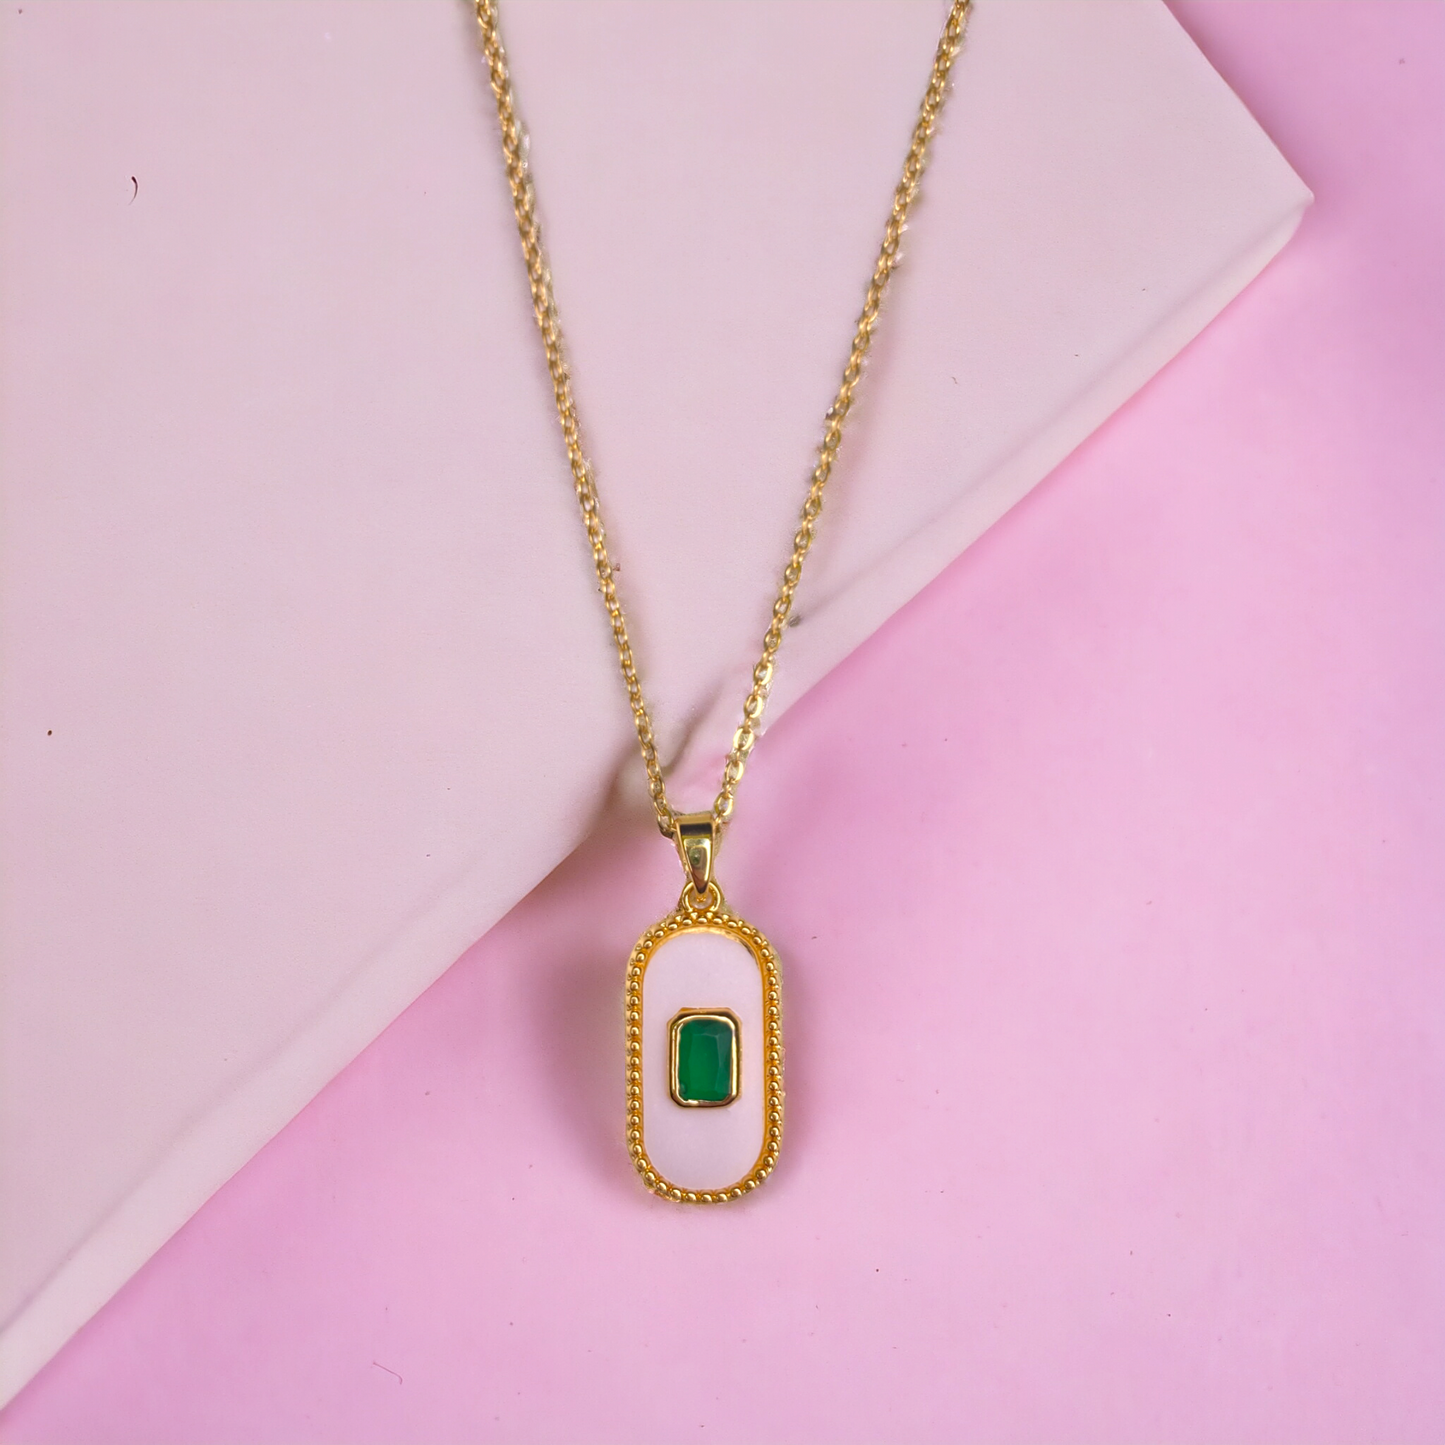 Handcrafted Green Stone Women’s Chain Pendant with White Accents